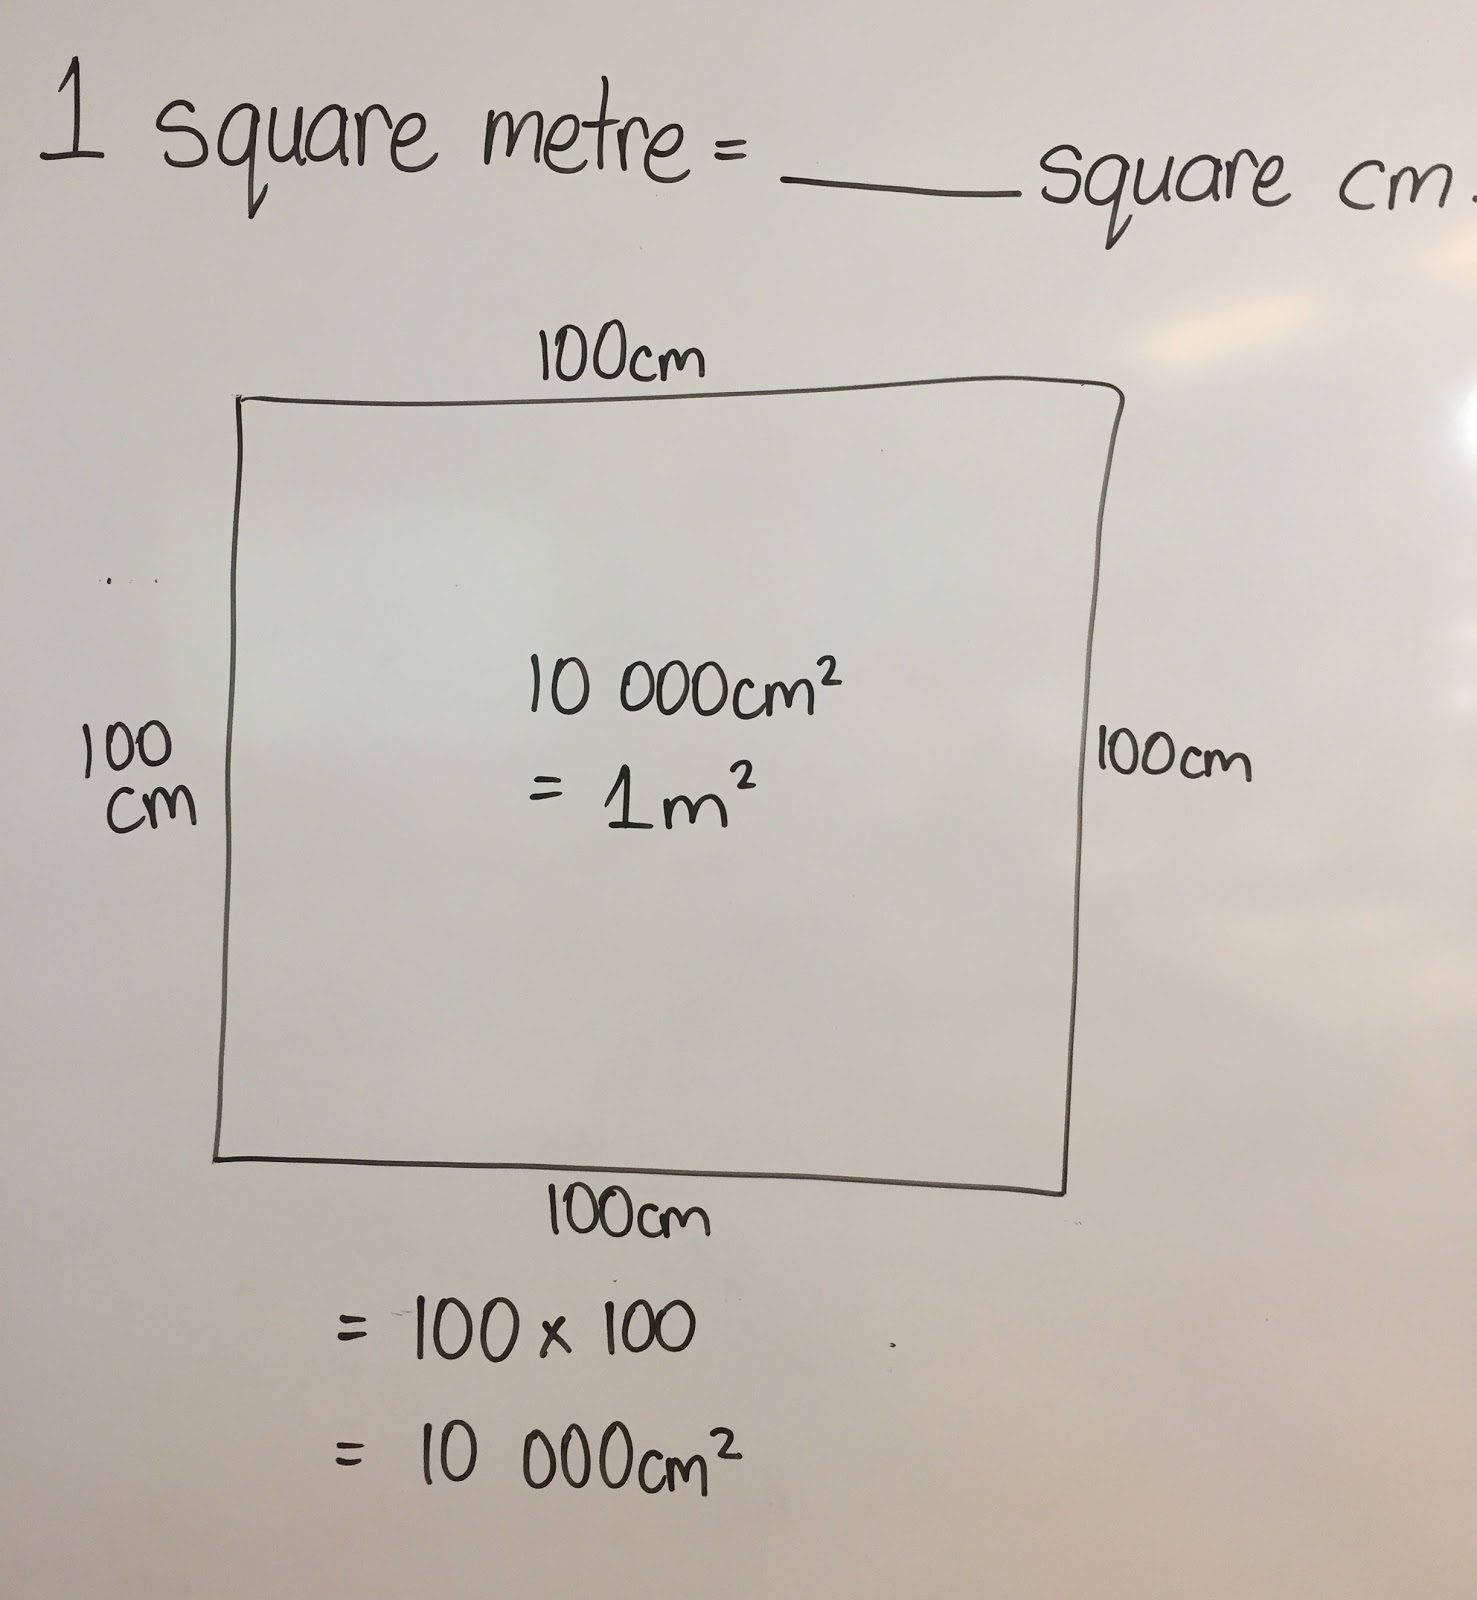 Why Isnt Square Meter The Same As 100 Square Centimeters